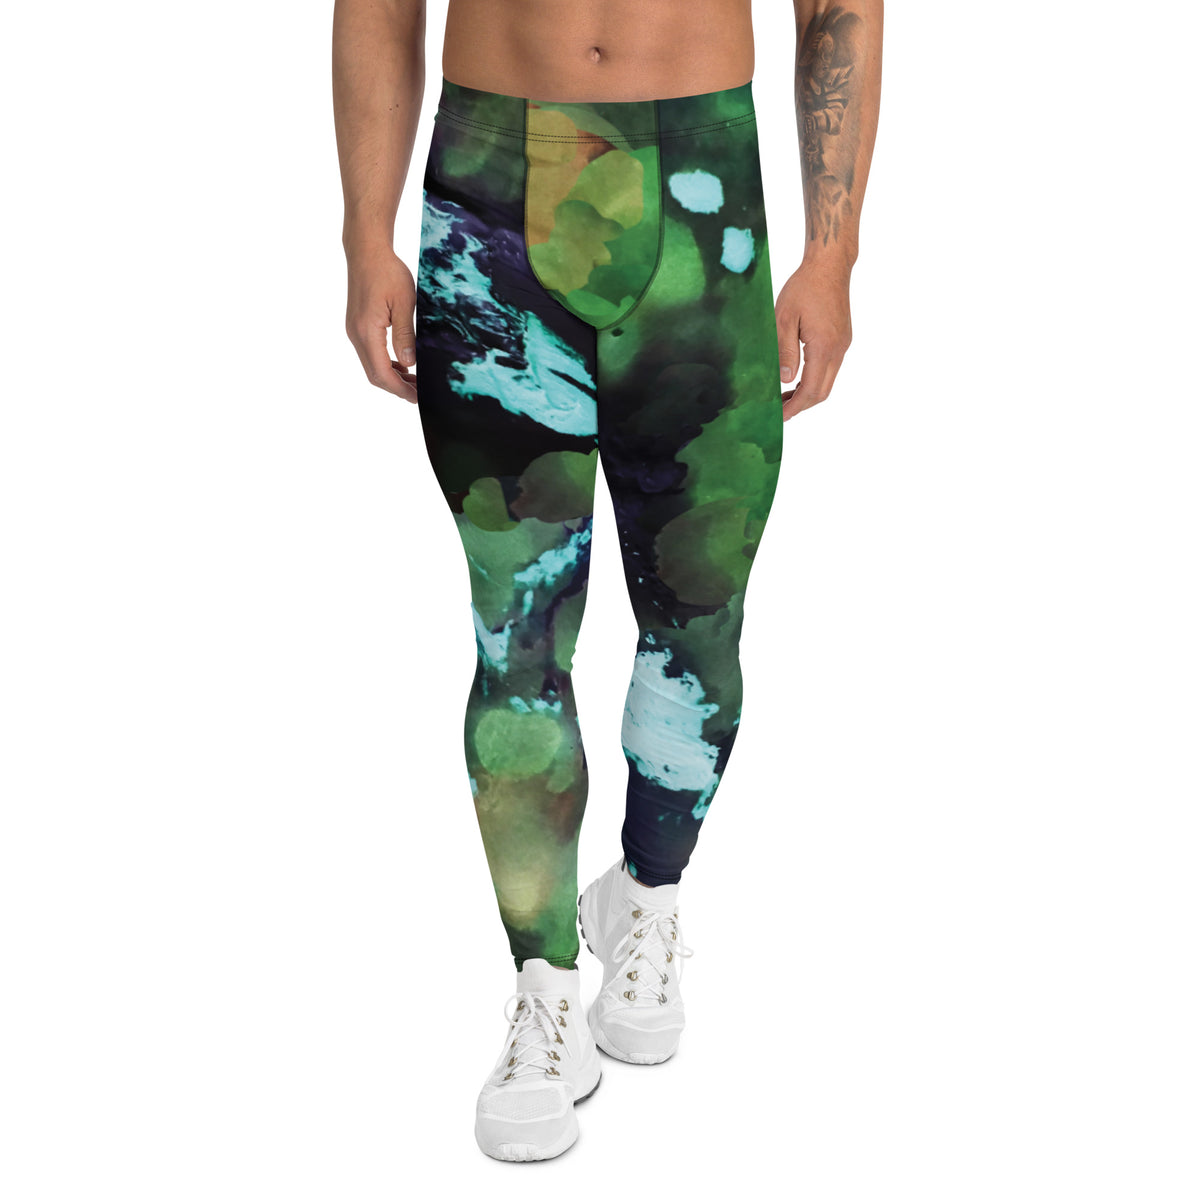 Camouflage print leggings Alo Yoga - XS, buy pre-owned at 35 EUR